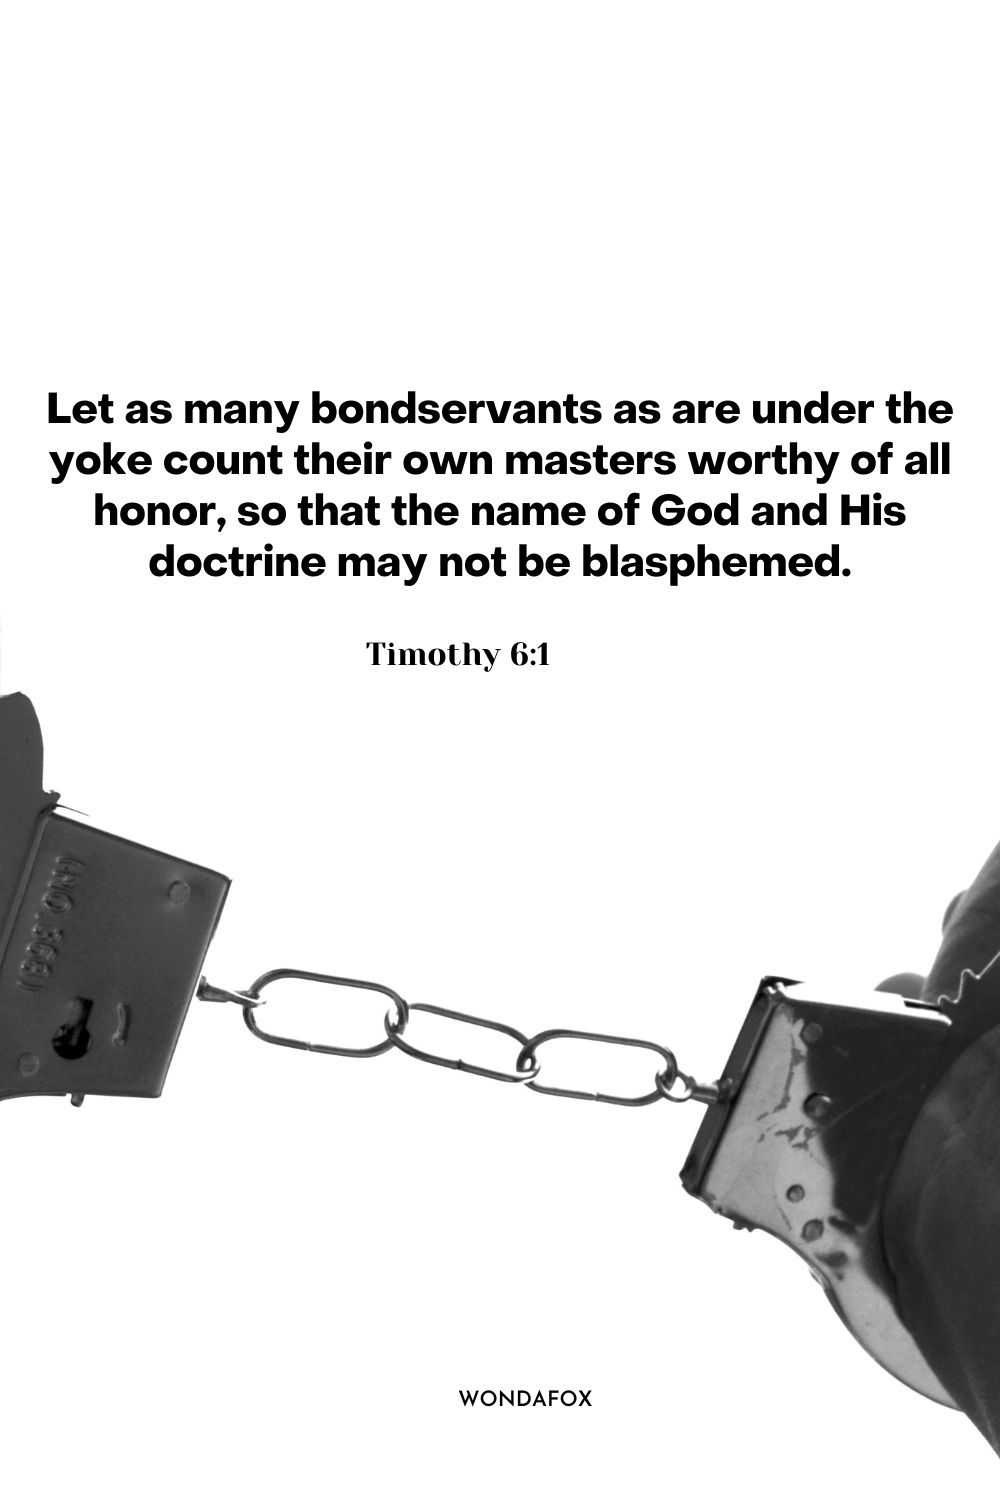 Let as many bondservants as are under the yoke count their own masters worthy of all honor, so that the name of God and His doctrine may not be blasphemed.
Timothy 6:1